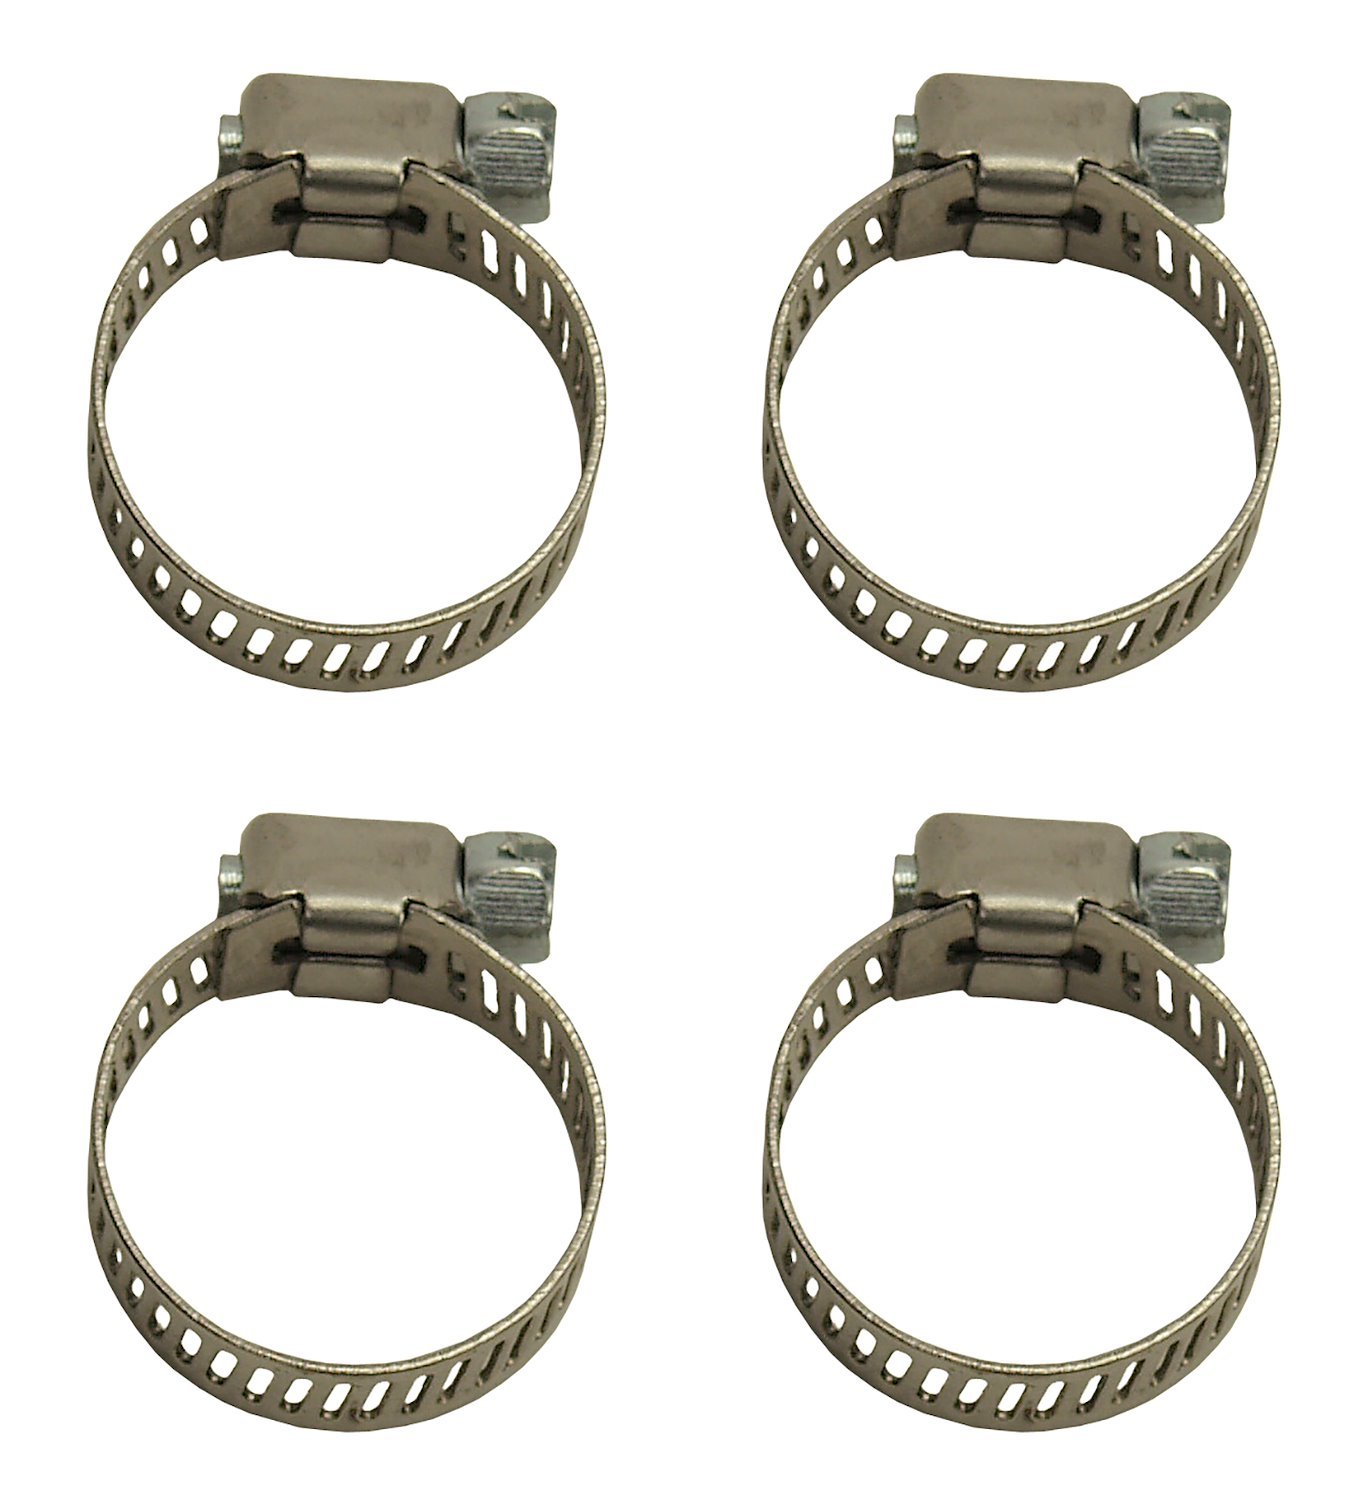 Stainless Steel Hose Clamps Fits hose 5/16